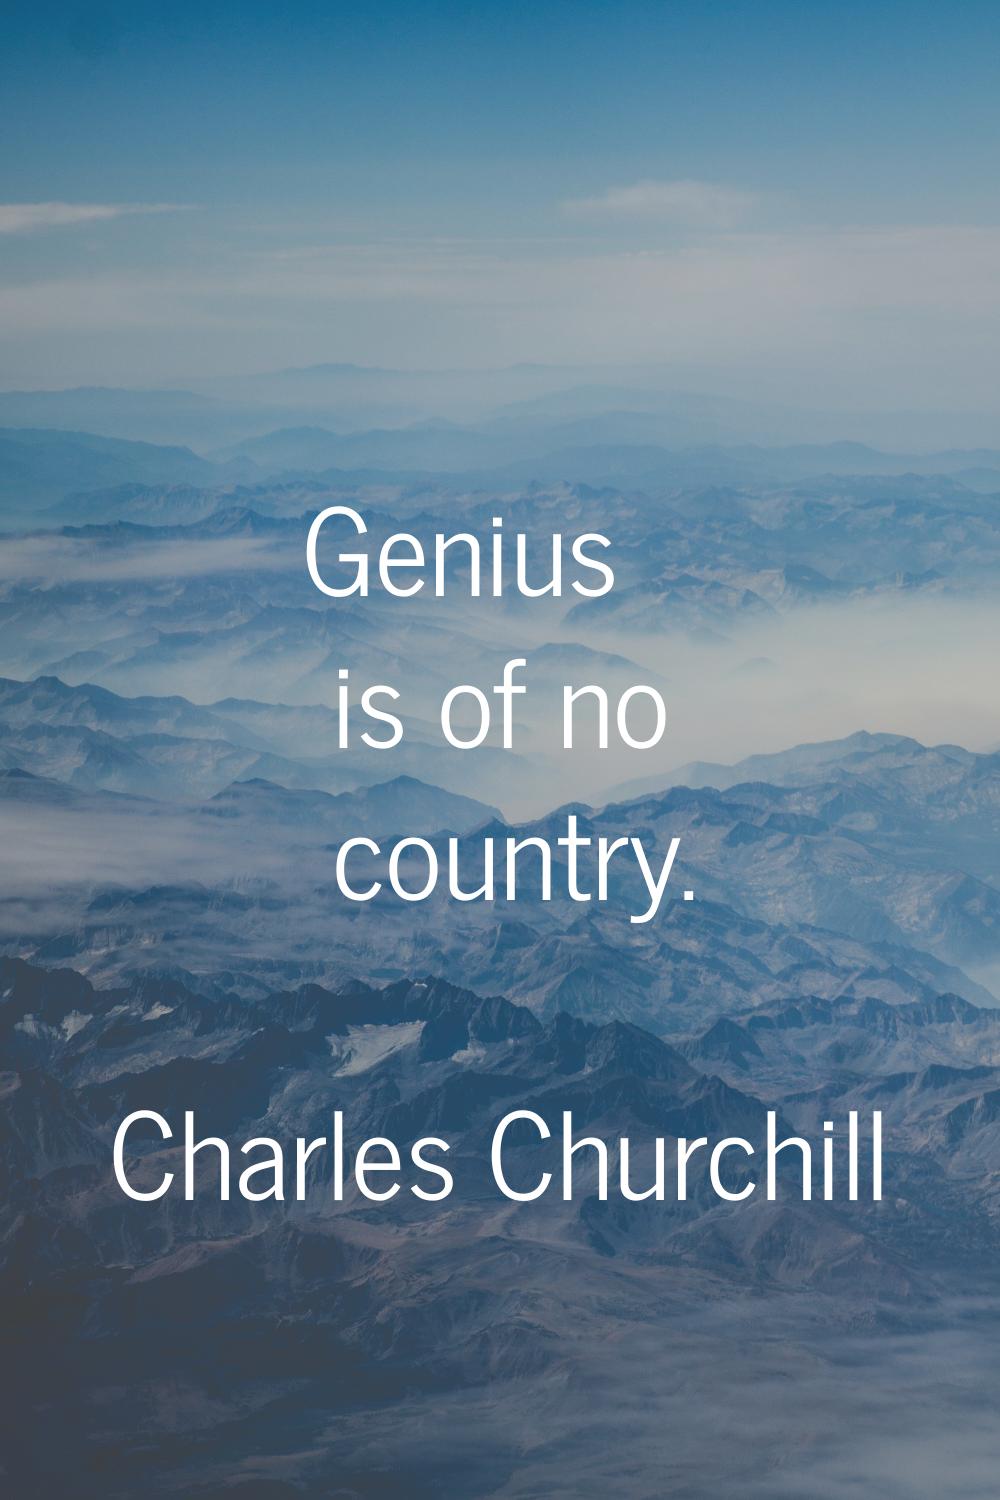 Genius is of no country.